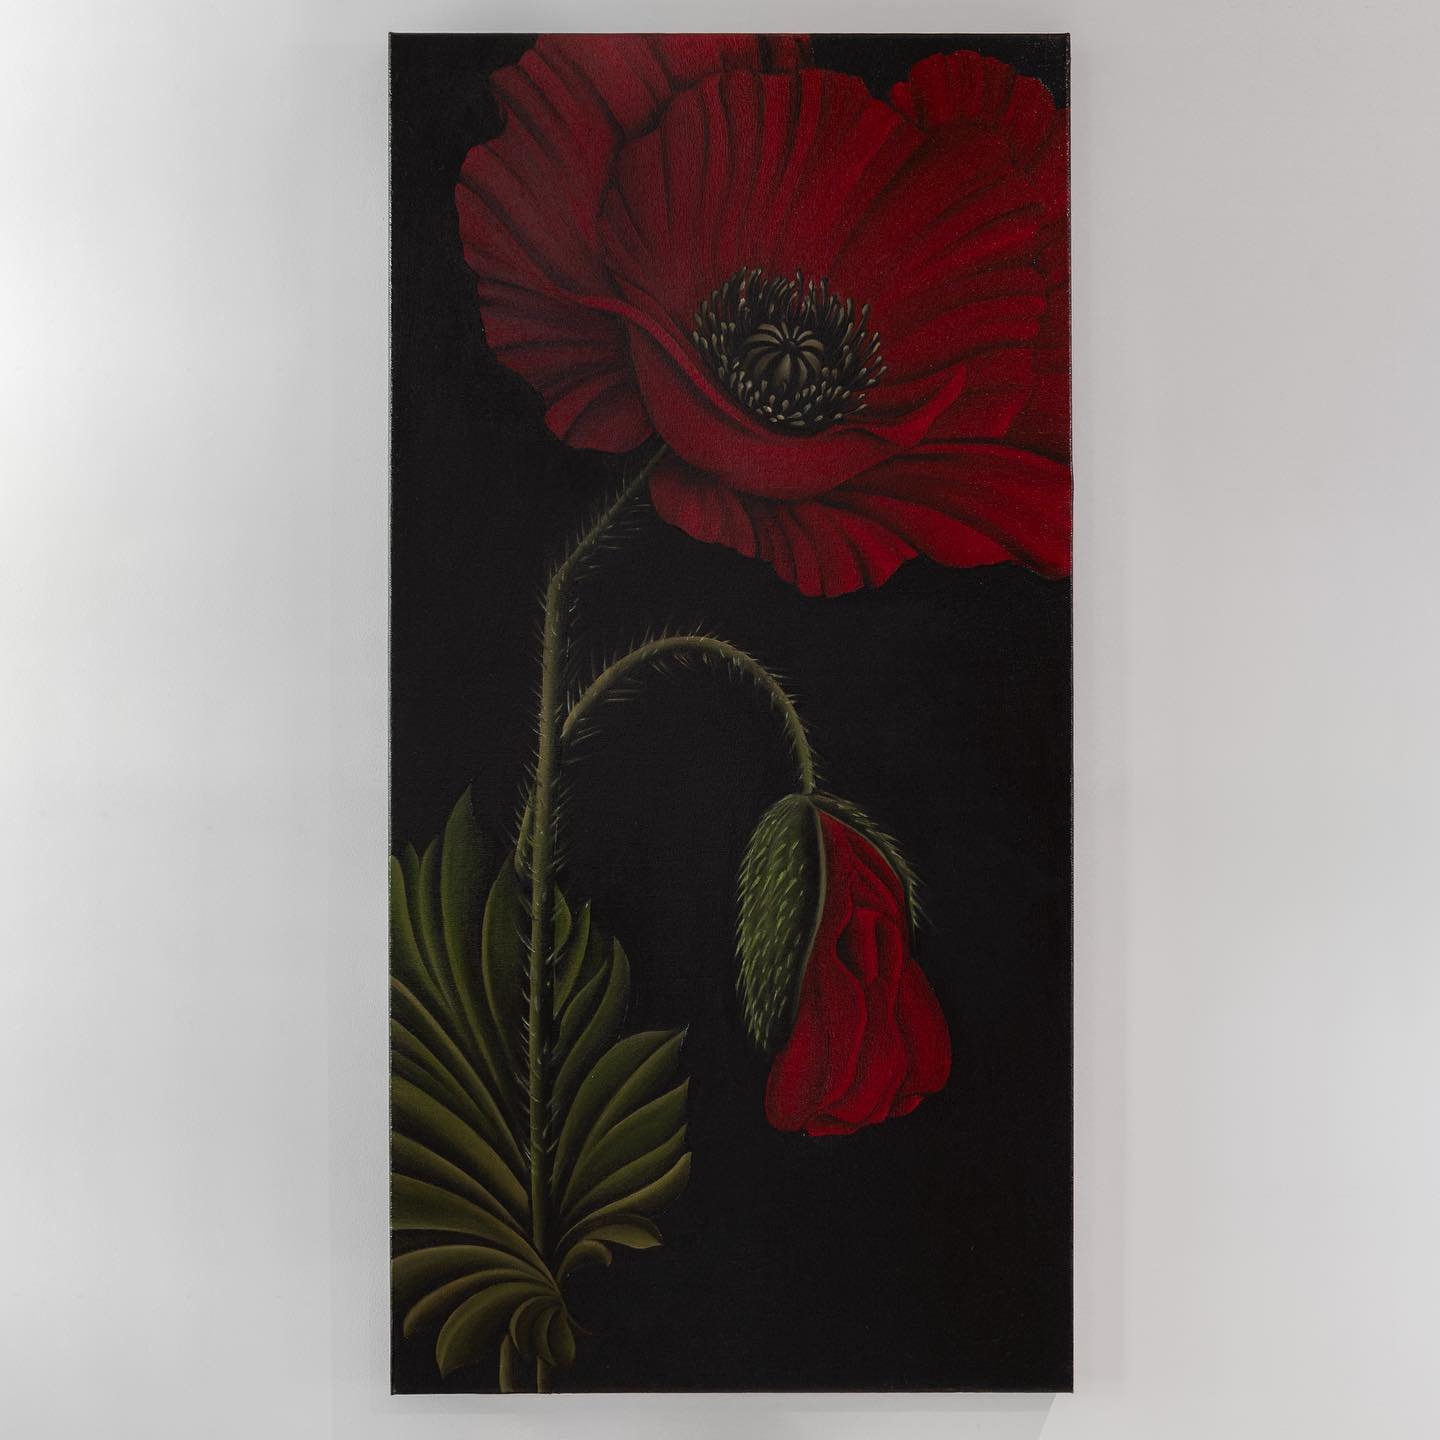 Red Poppy 
Oil on Canvas
50x100cm

I highly recommend watching a poppy bloom from bud. It&rsquo;s mesmerising. 

I spent a few months working on this piece, building it up over time to capture the richness, depth and sensuality of a poppy emerging fr